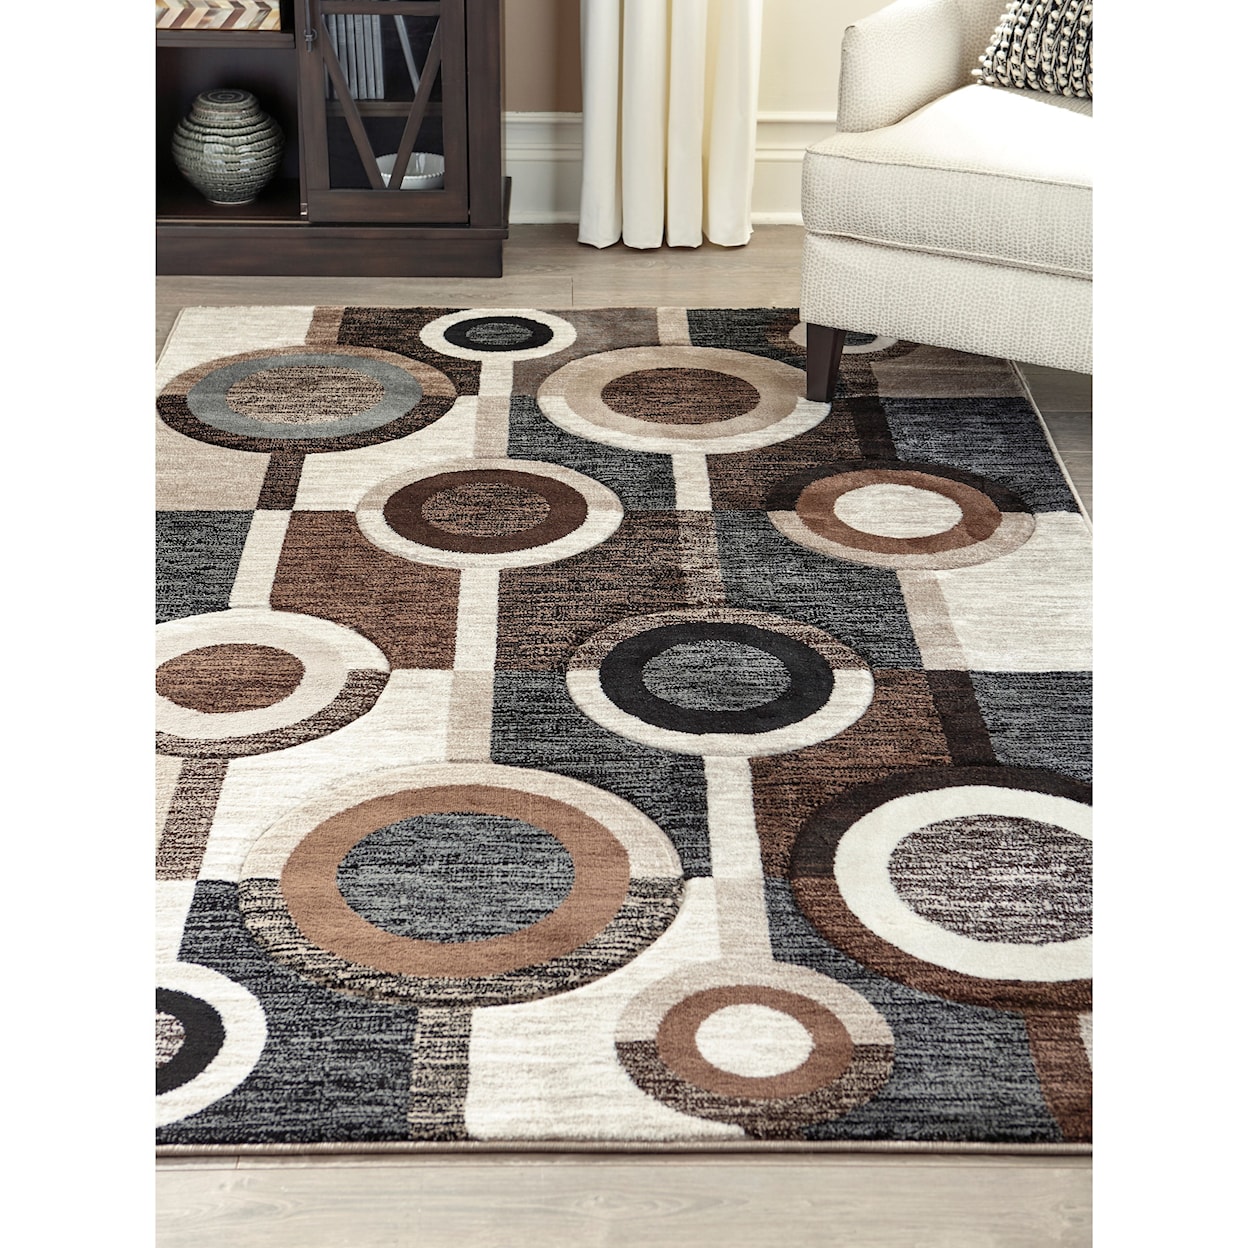 Benchcraft Contemporary Area Rugs Guintte Black/Brown/Cream Large Rug